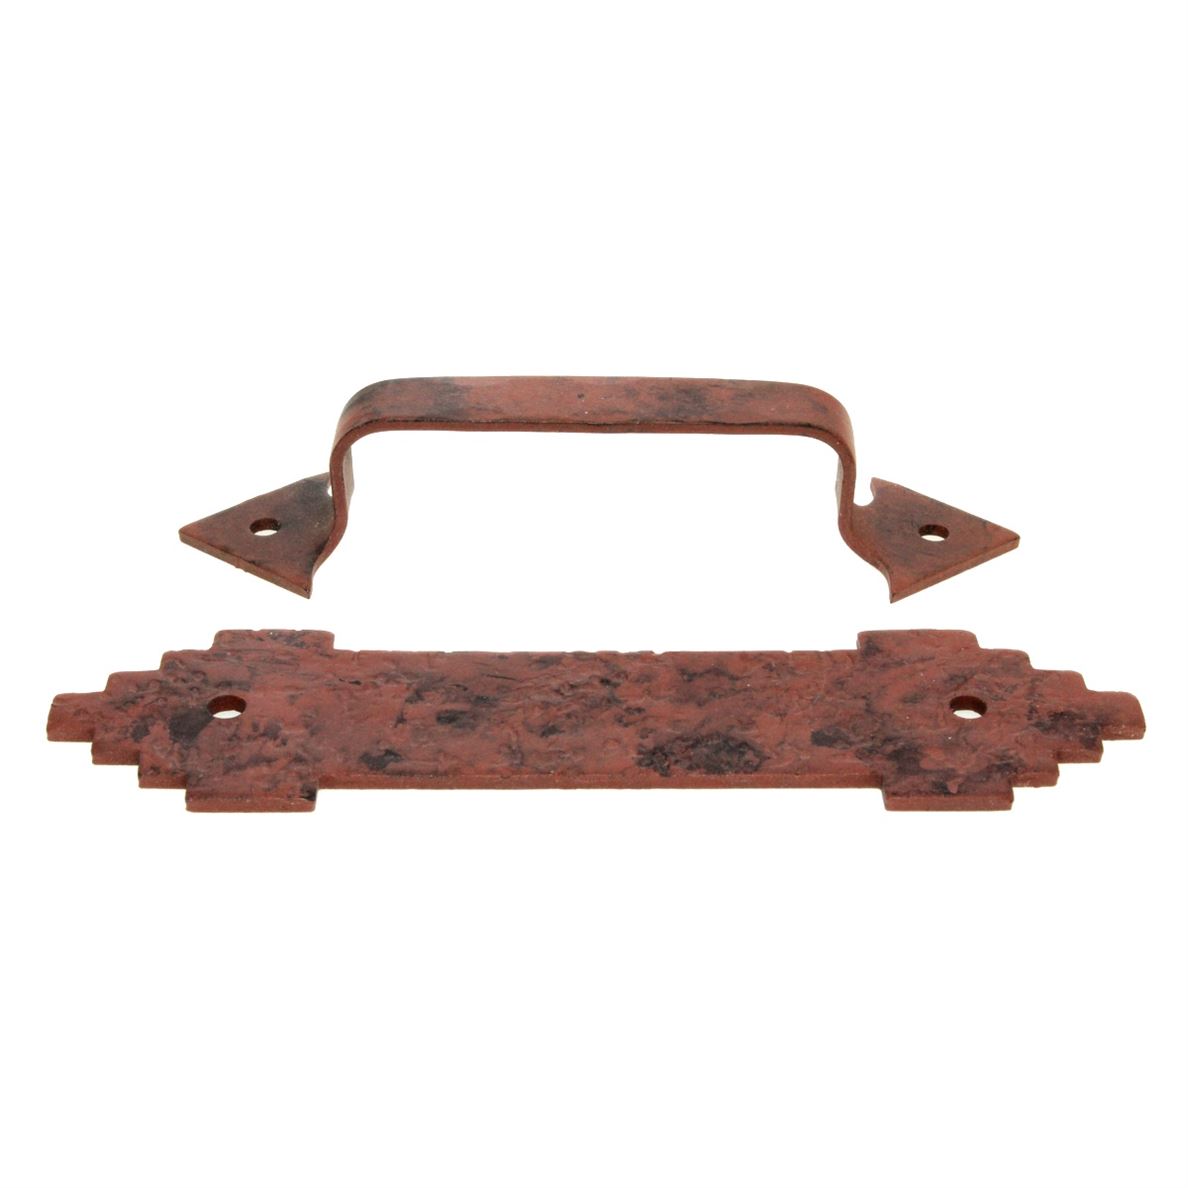 Acorn Mfg Forged Iron Cabinet Pull With Backplate 3 3/4" (96mm) Ctr. Rust MPANP